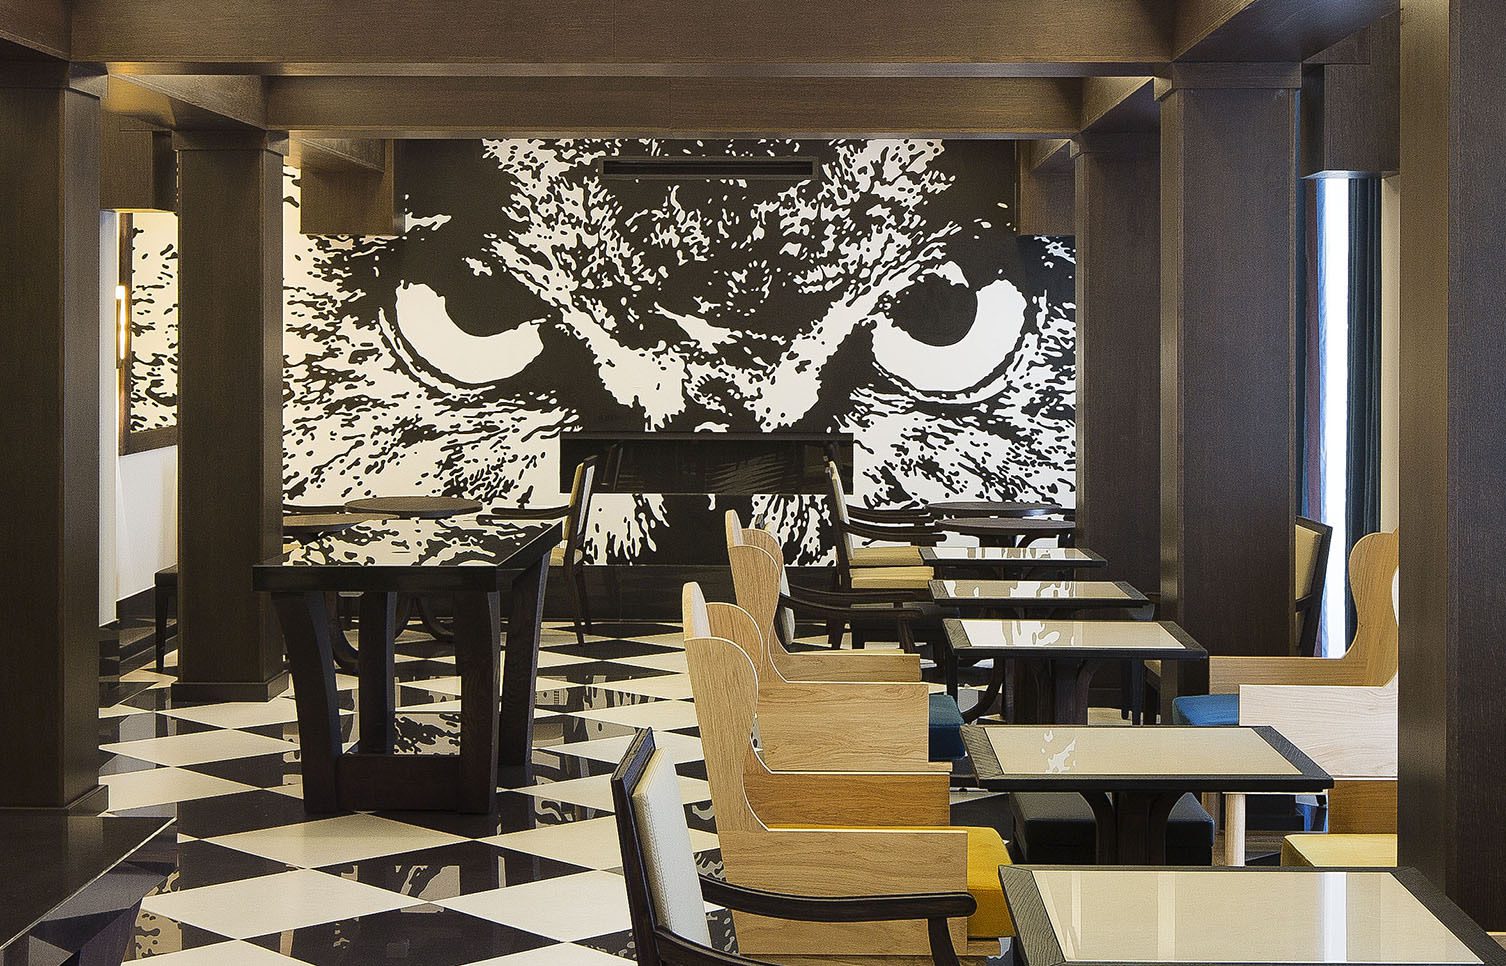 Chess Hotel Paris by Gilles & Boissier, Yellowtrace